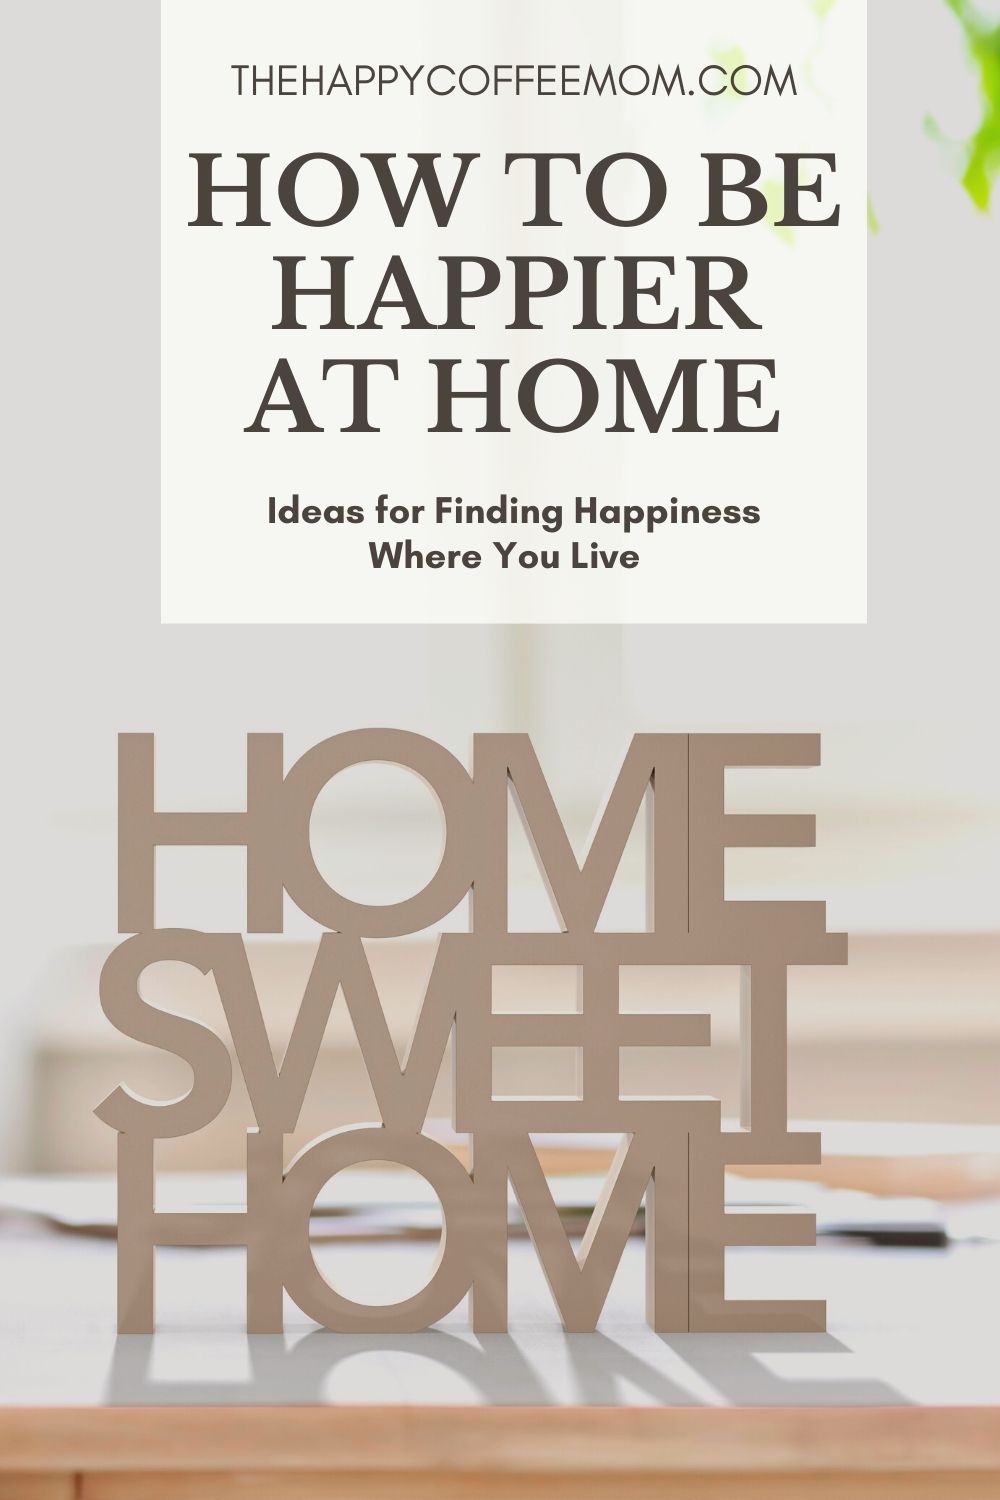 How to Be Happier at Home